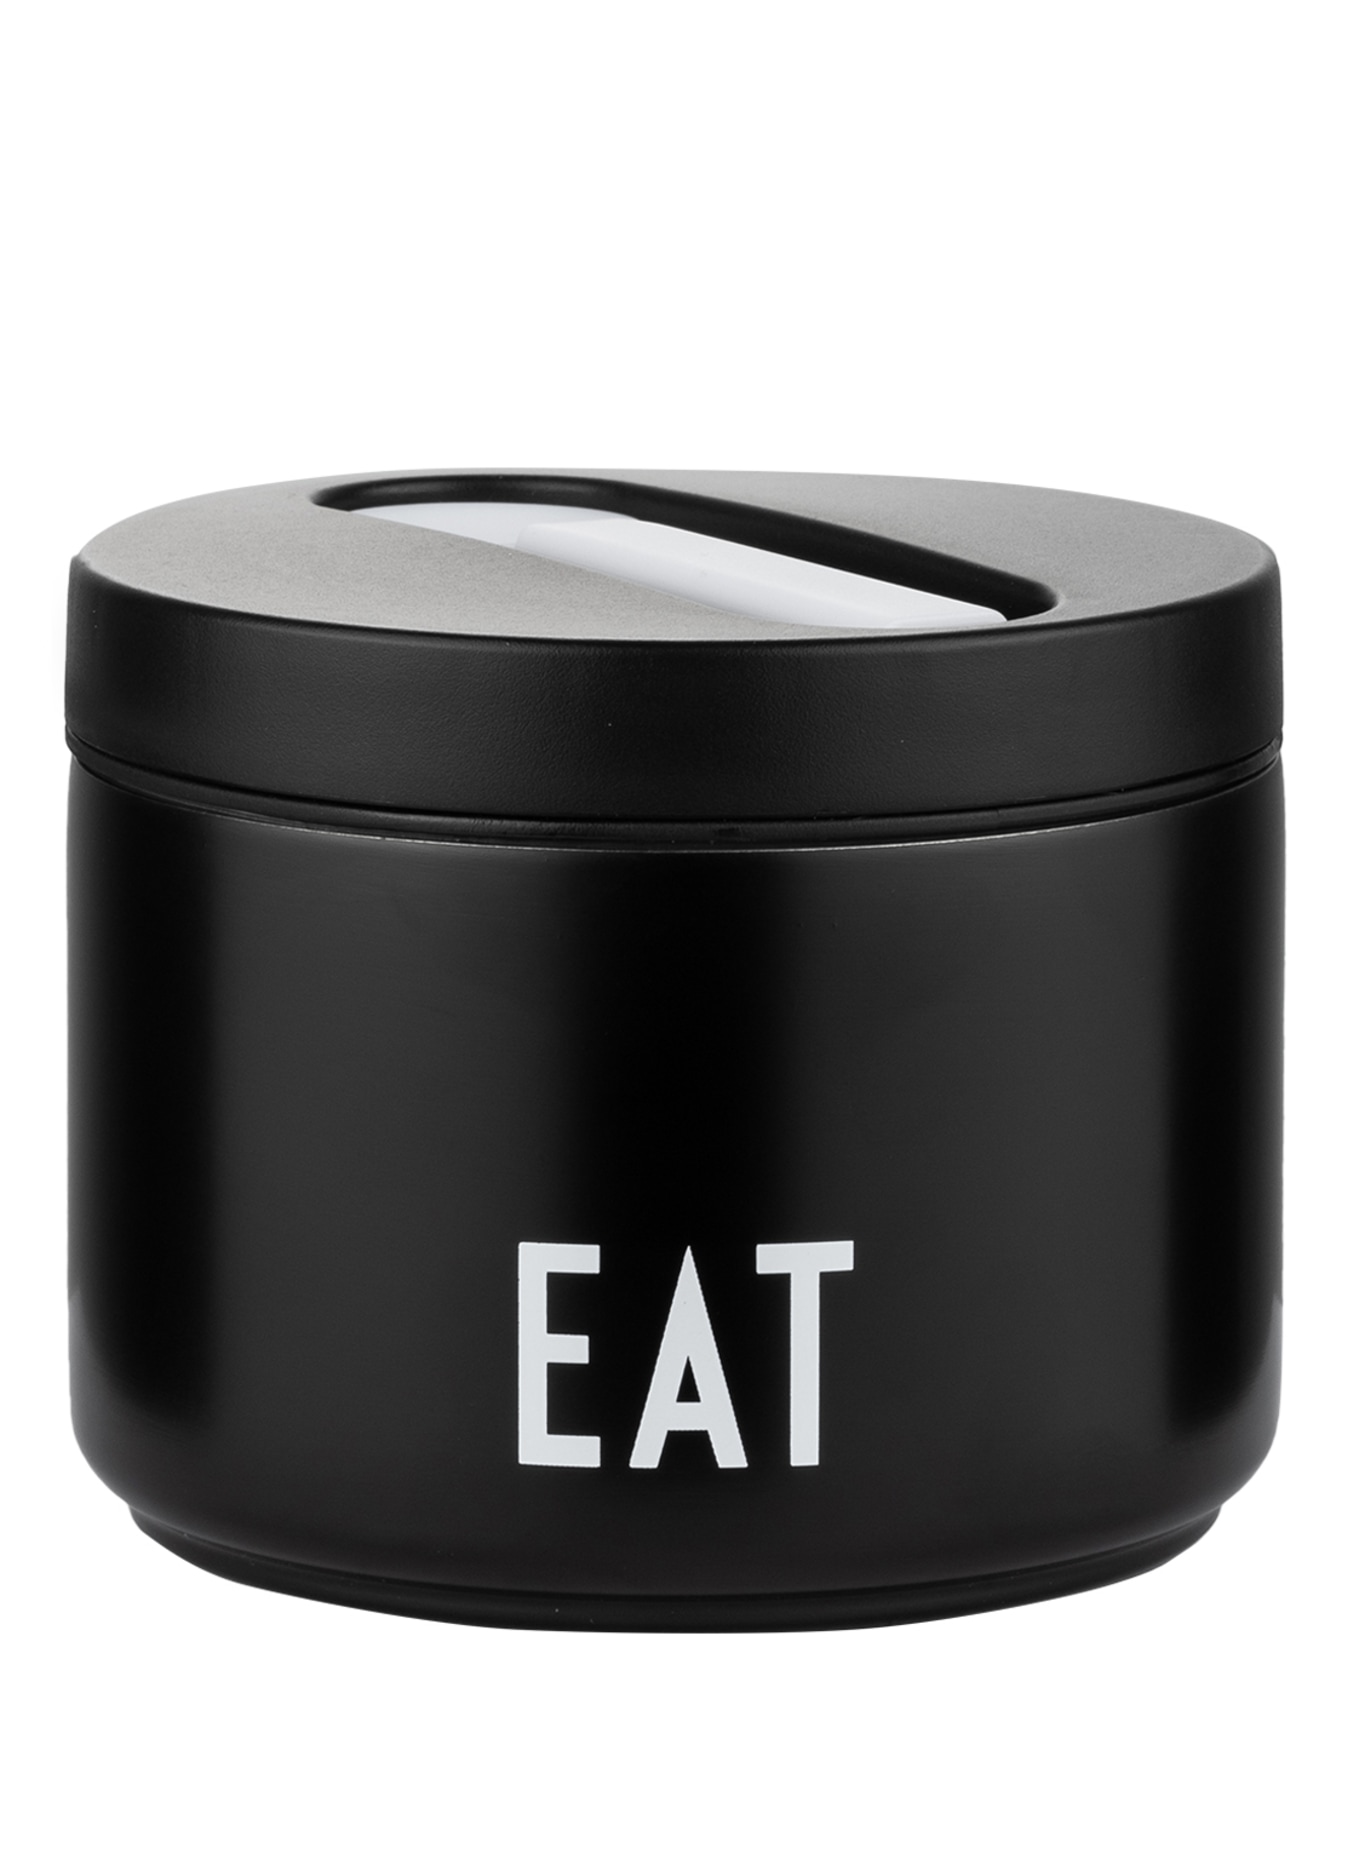 DESIGN LETTERS Thermo-Lunchbox EAT SMALL, Farbe: SCHWARZ/ WEISS (Bild 1)